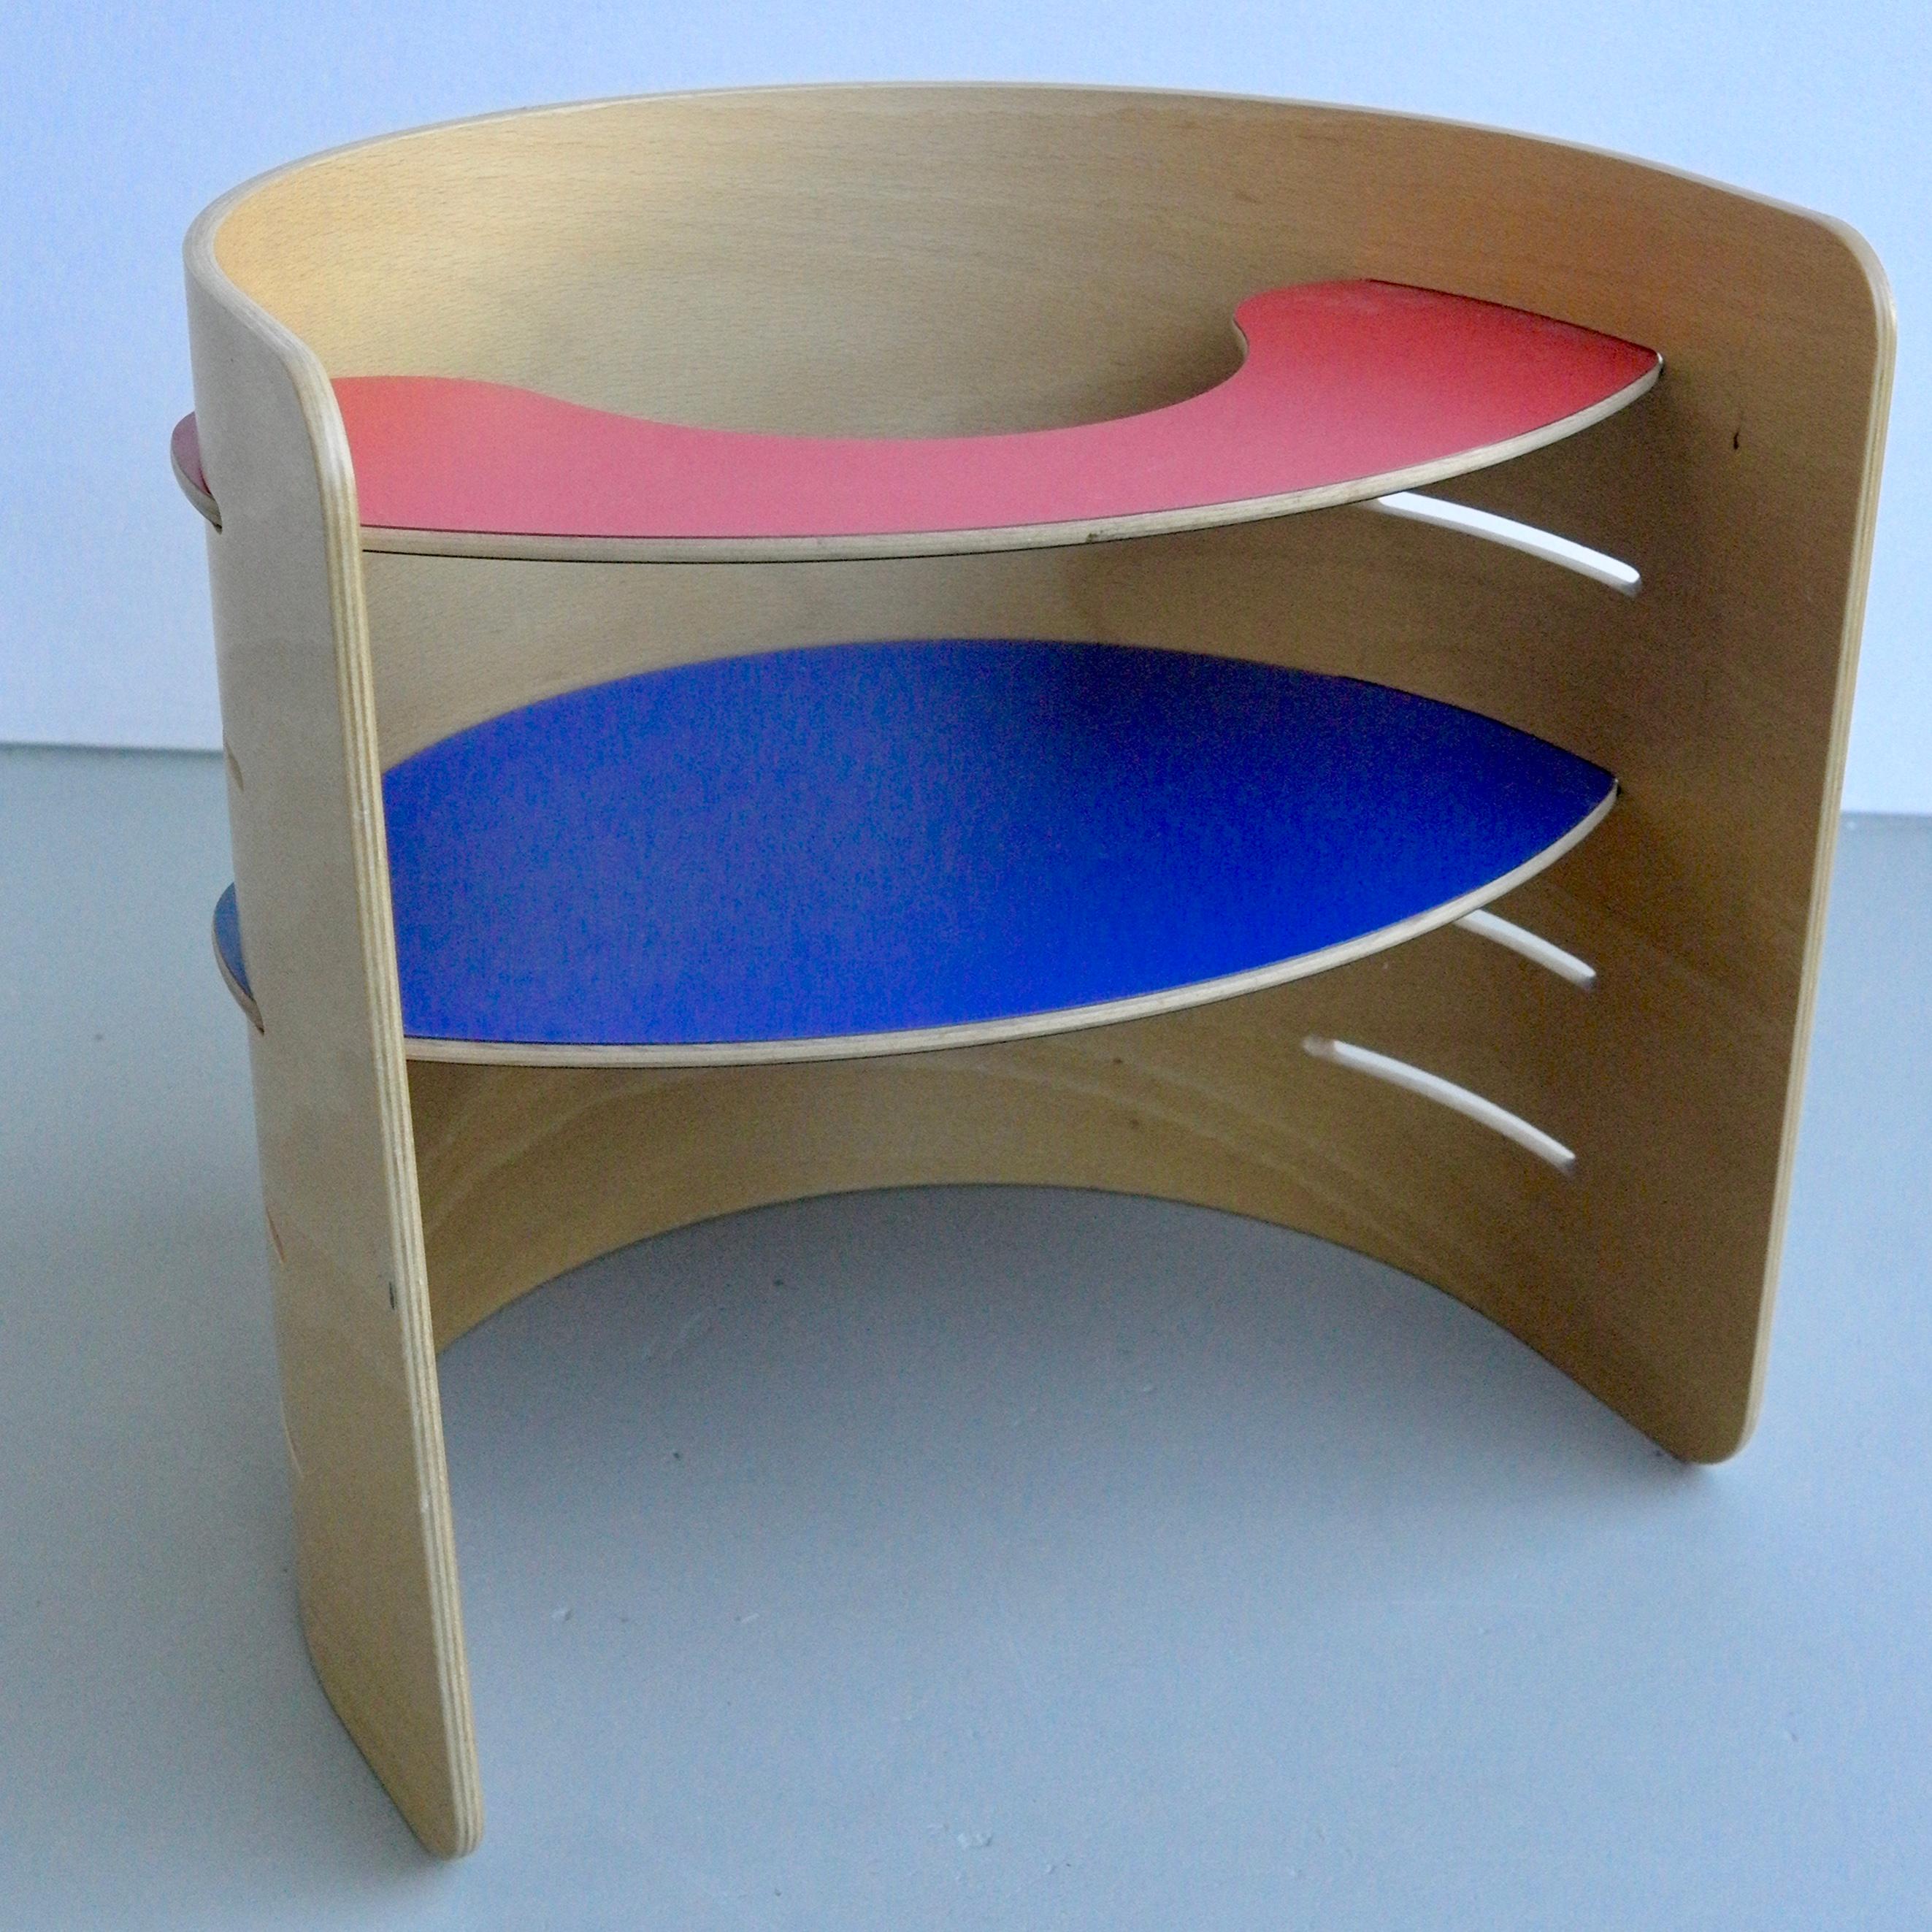 Late 20th Century Red and Blue Child's Chair by Architect Kristian Vedel, Denmark, 1952